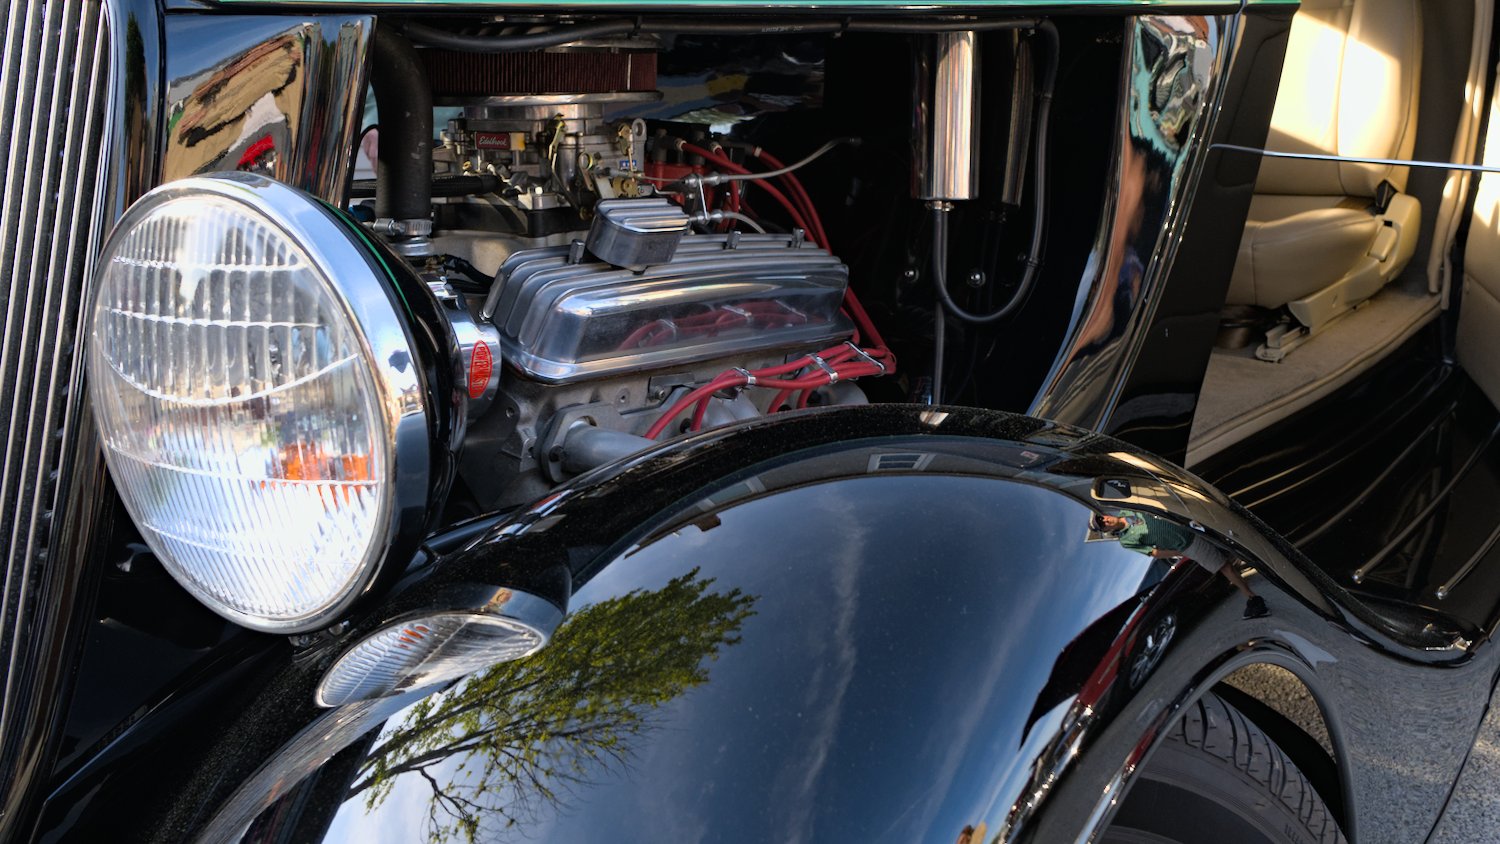 Engine compartment of hot rod.